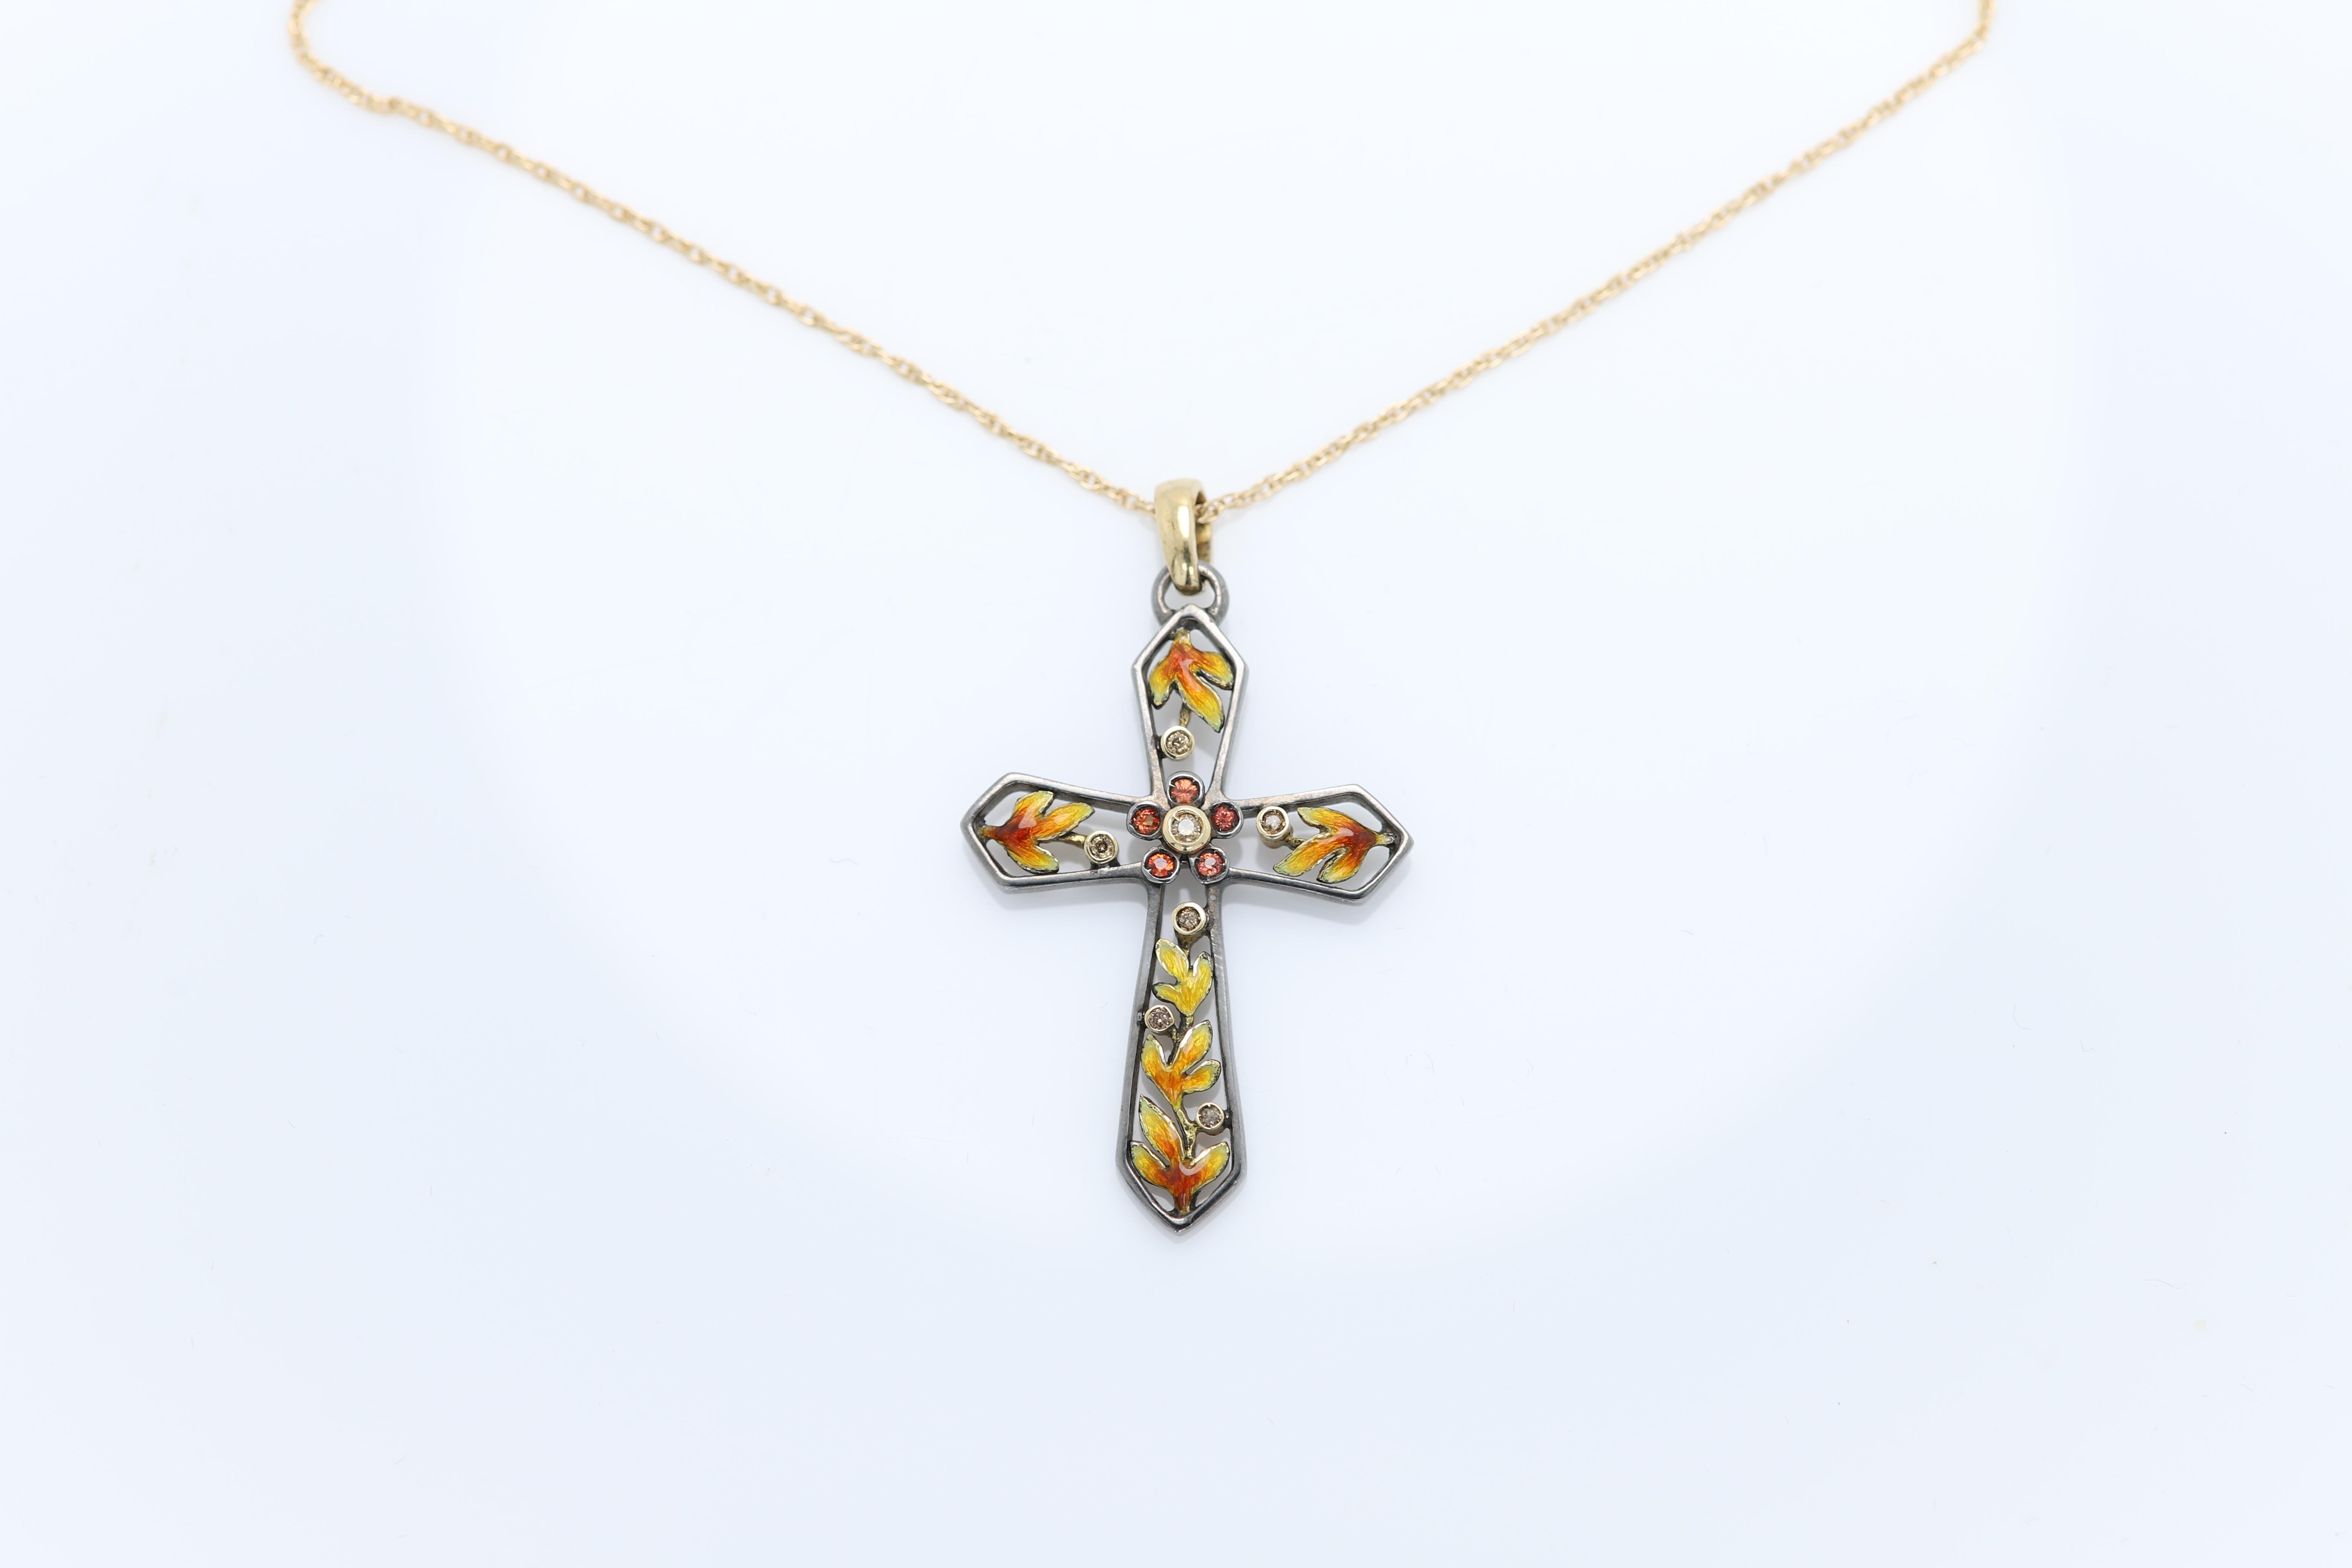 Fire Enamel Cross with diamonds and Orange Sapphire, 
Brilliant colors, elegant and unique.
18k yellow gold
oxidized sterling silver 925 
orange sapphire 
champagne diamonds
Hand made in Spain
Size: 1.5' Inch (length)
total weight 6.4 grams (silver